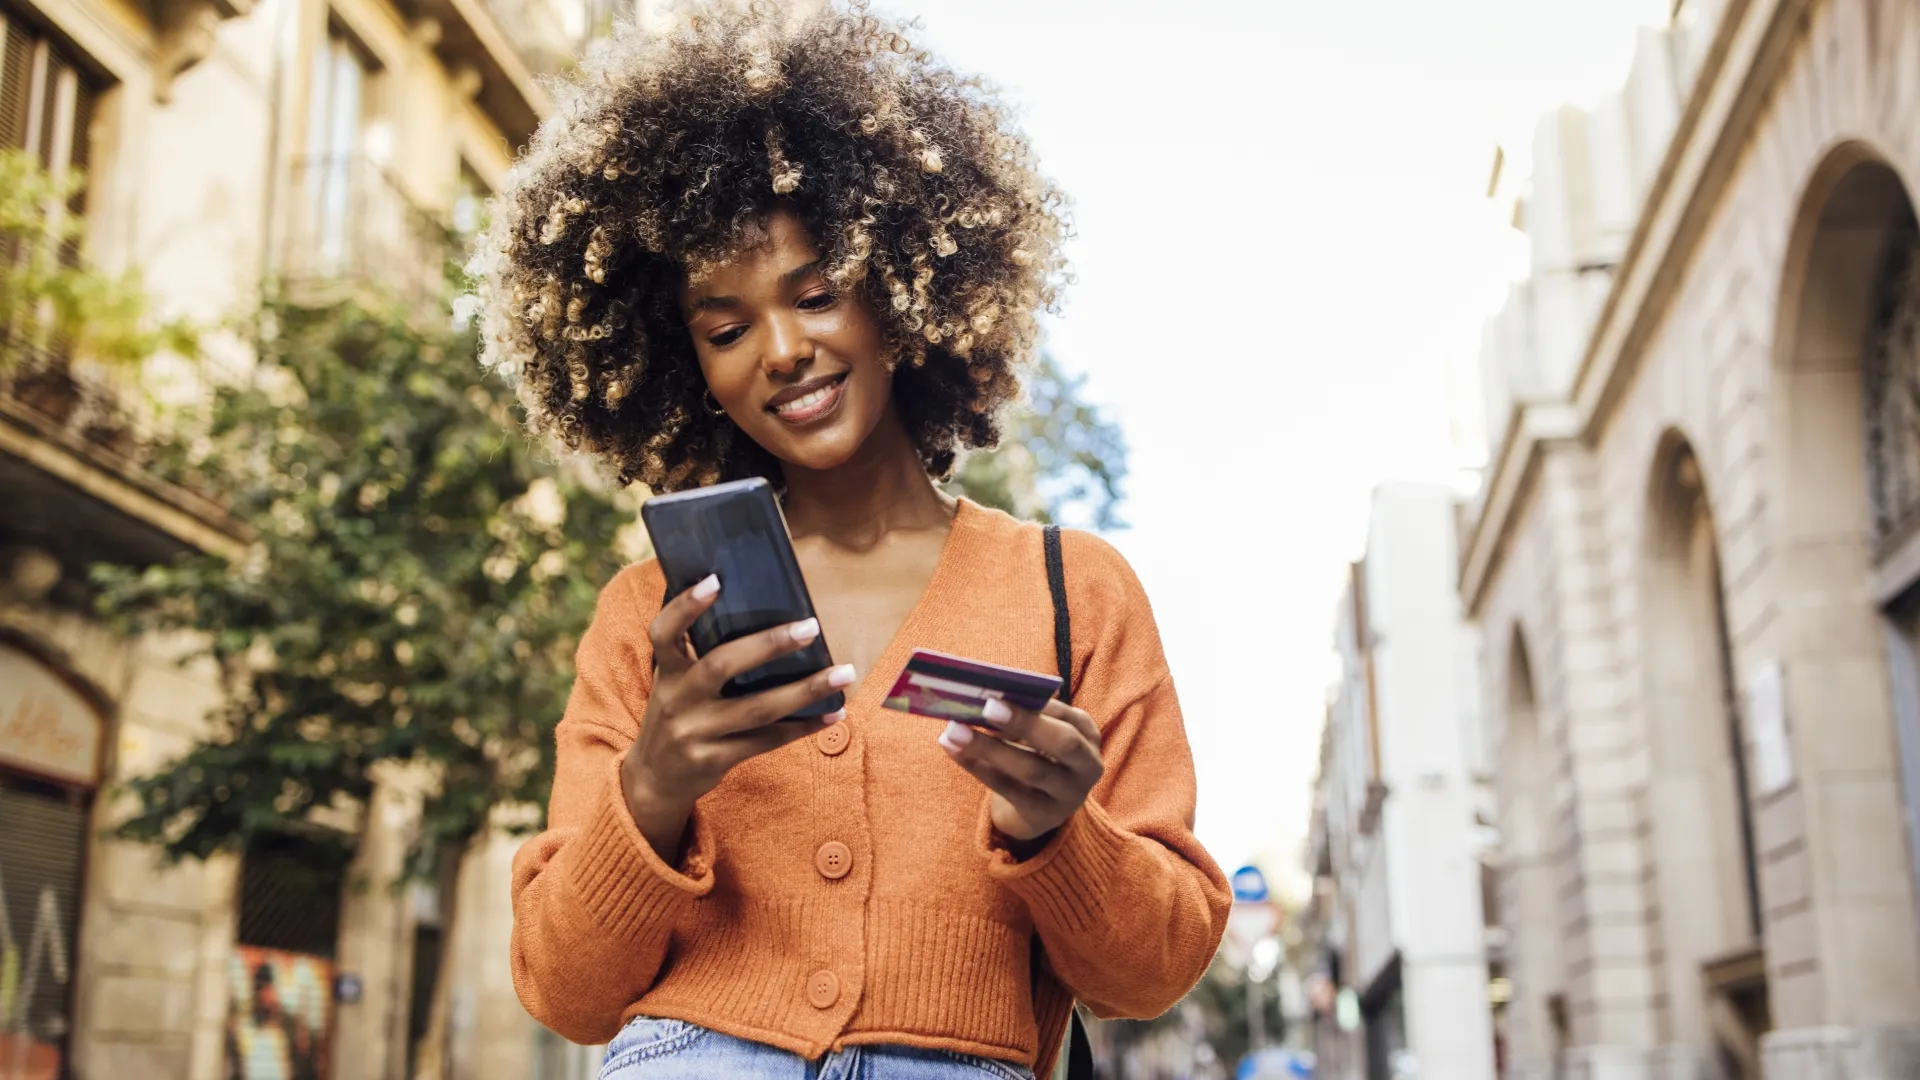 Portrait of a young African American woman on vacation in Barcelona shopping online on the street.